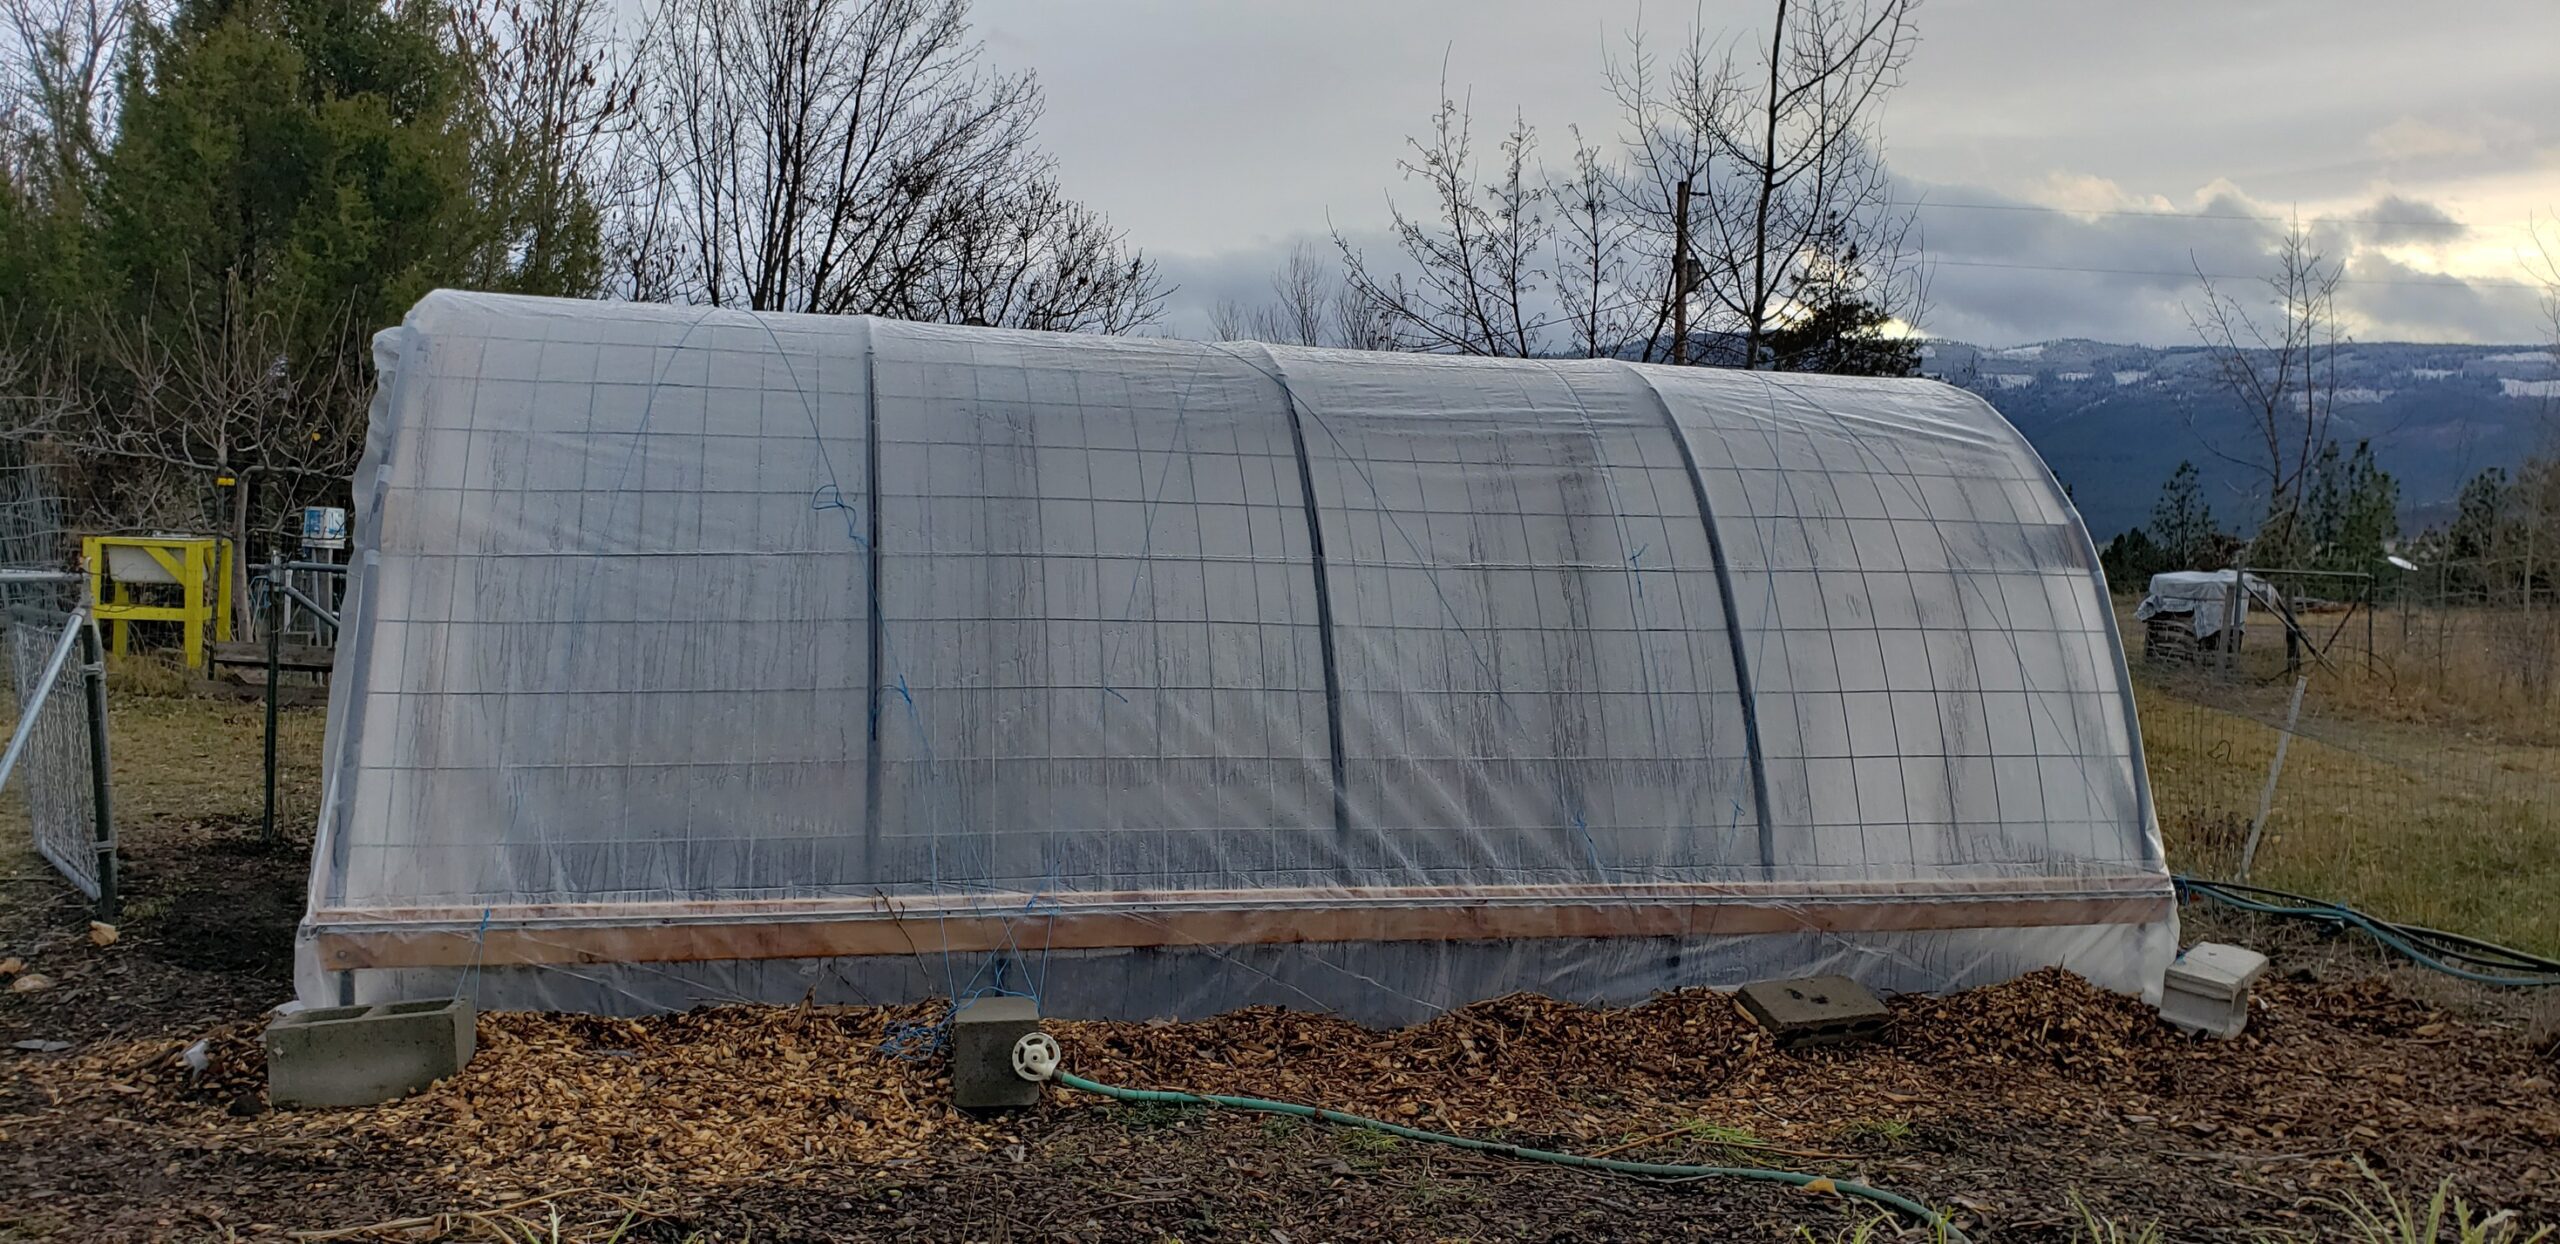 Cattle Panel Greenhouse